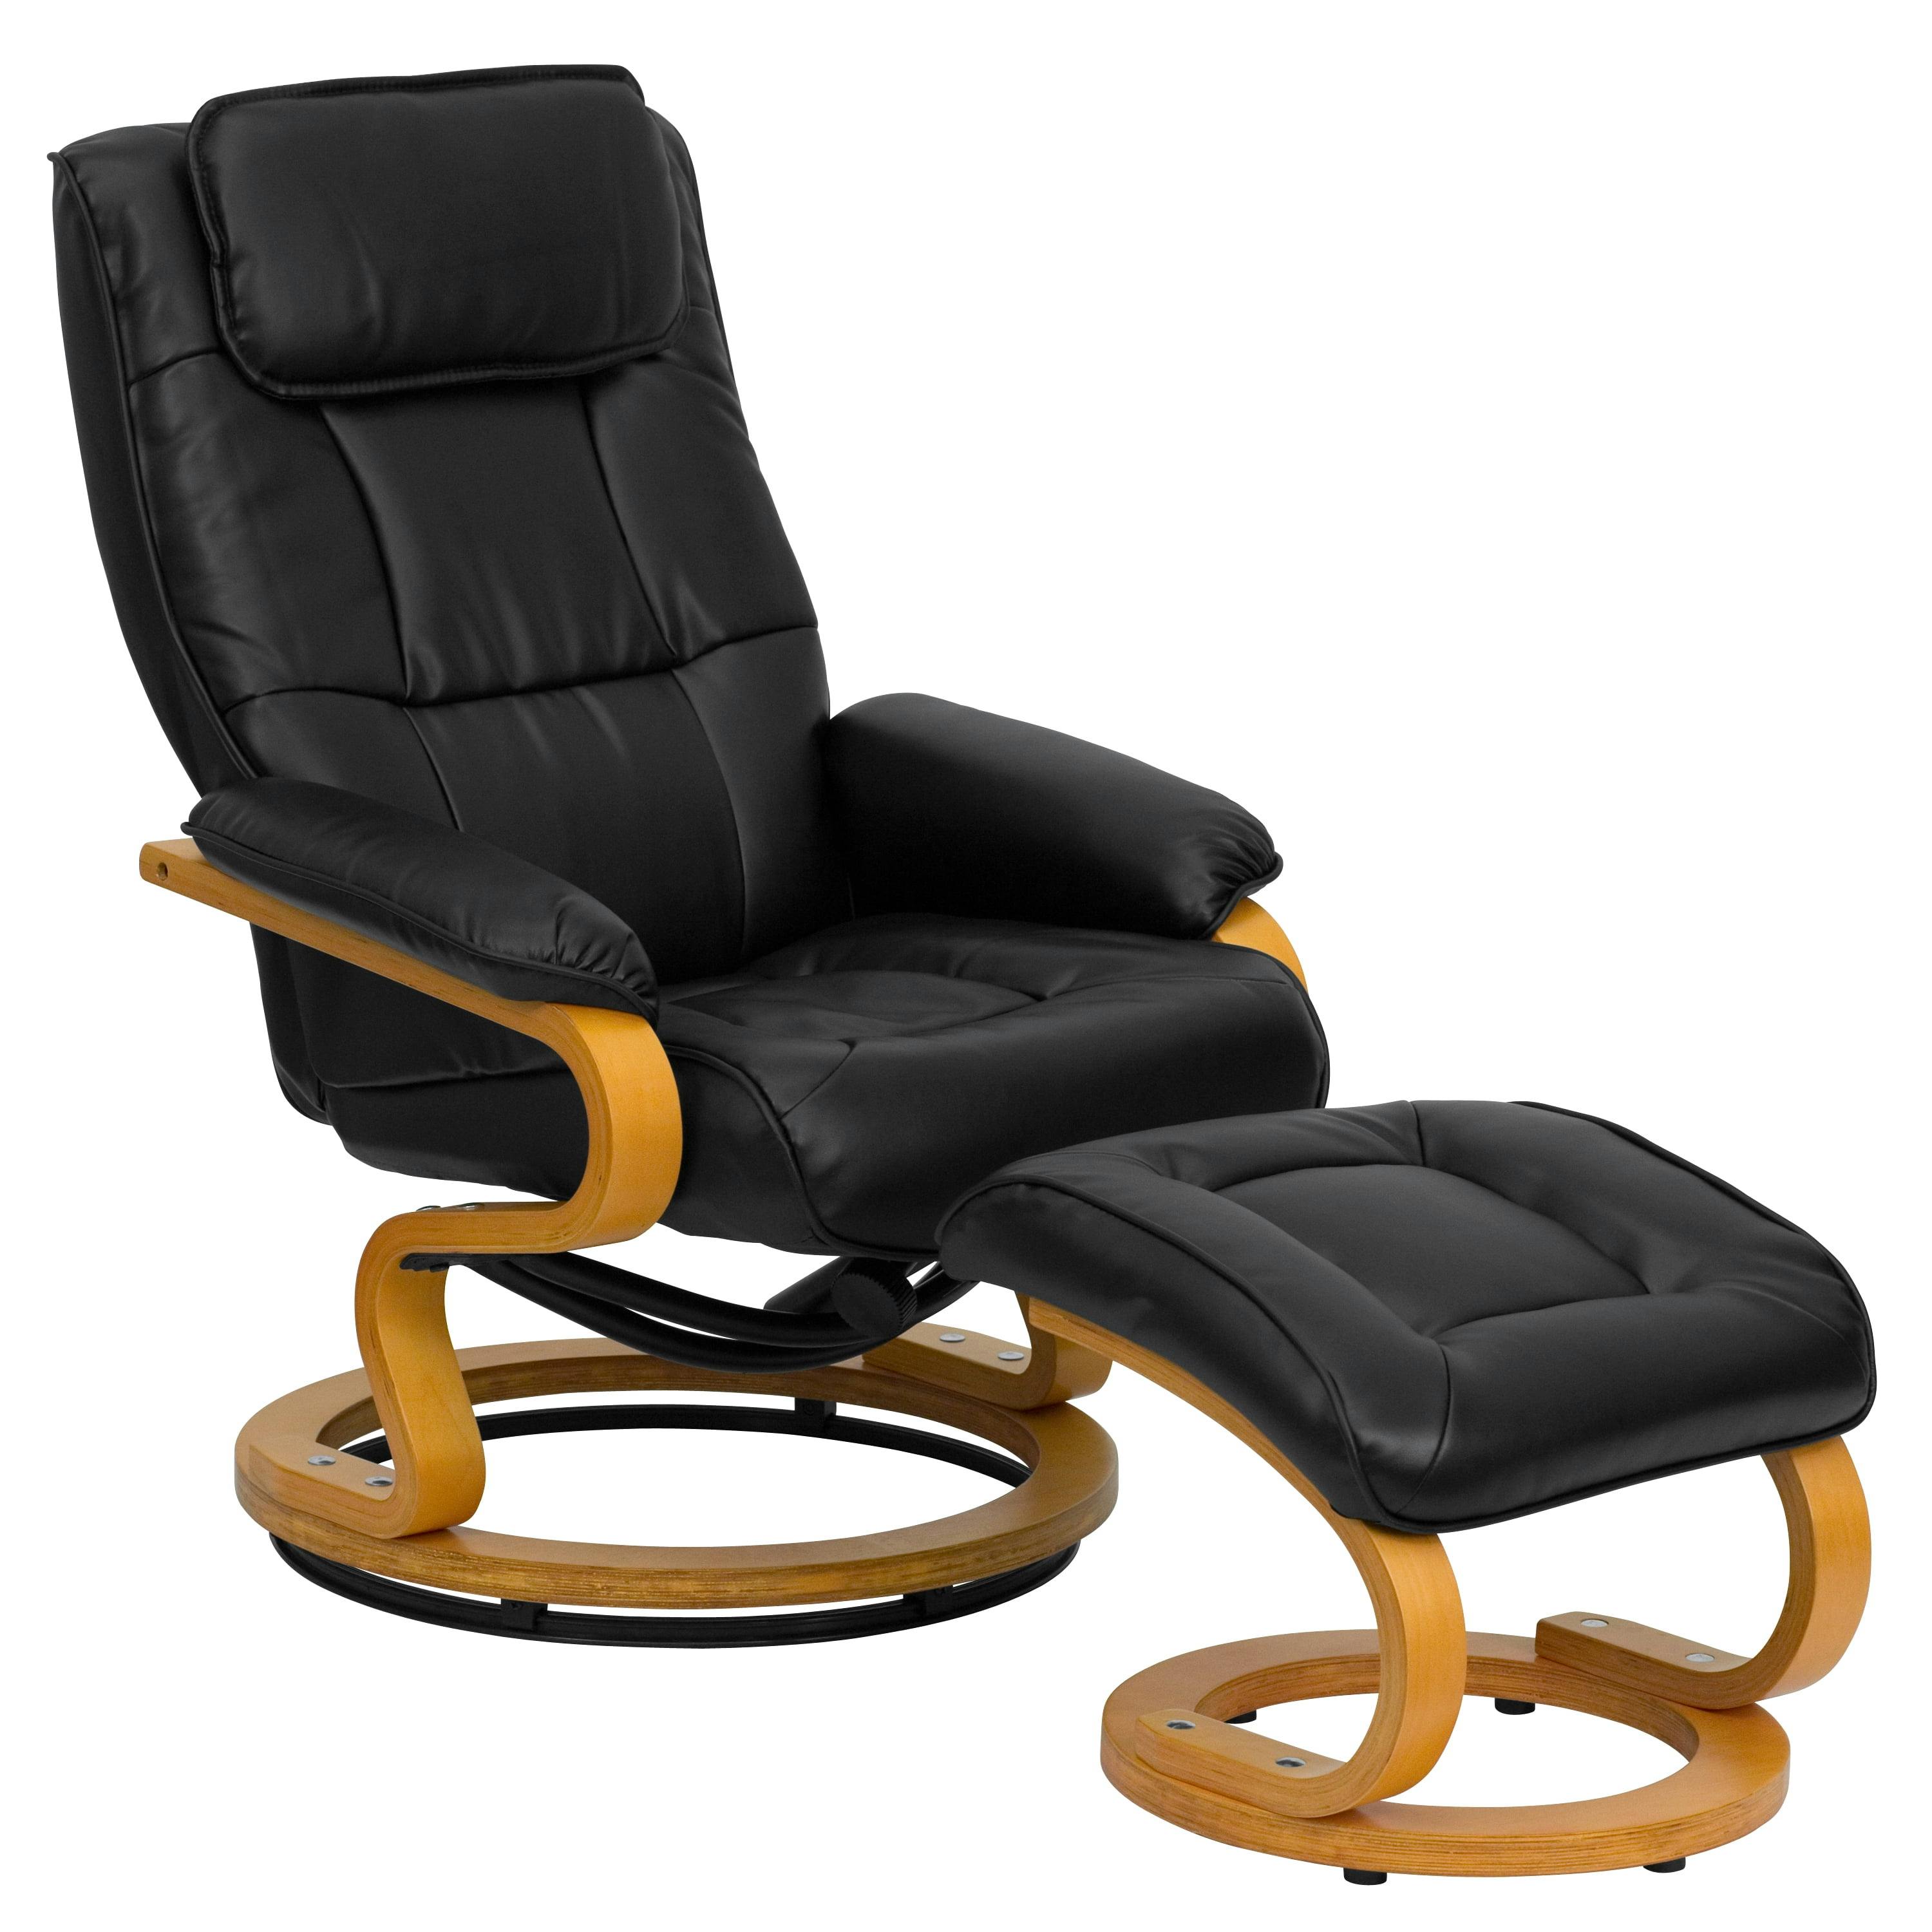 Swivel Black Leather Recliner with Ottoman and Maple Wood Base